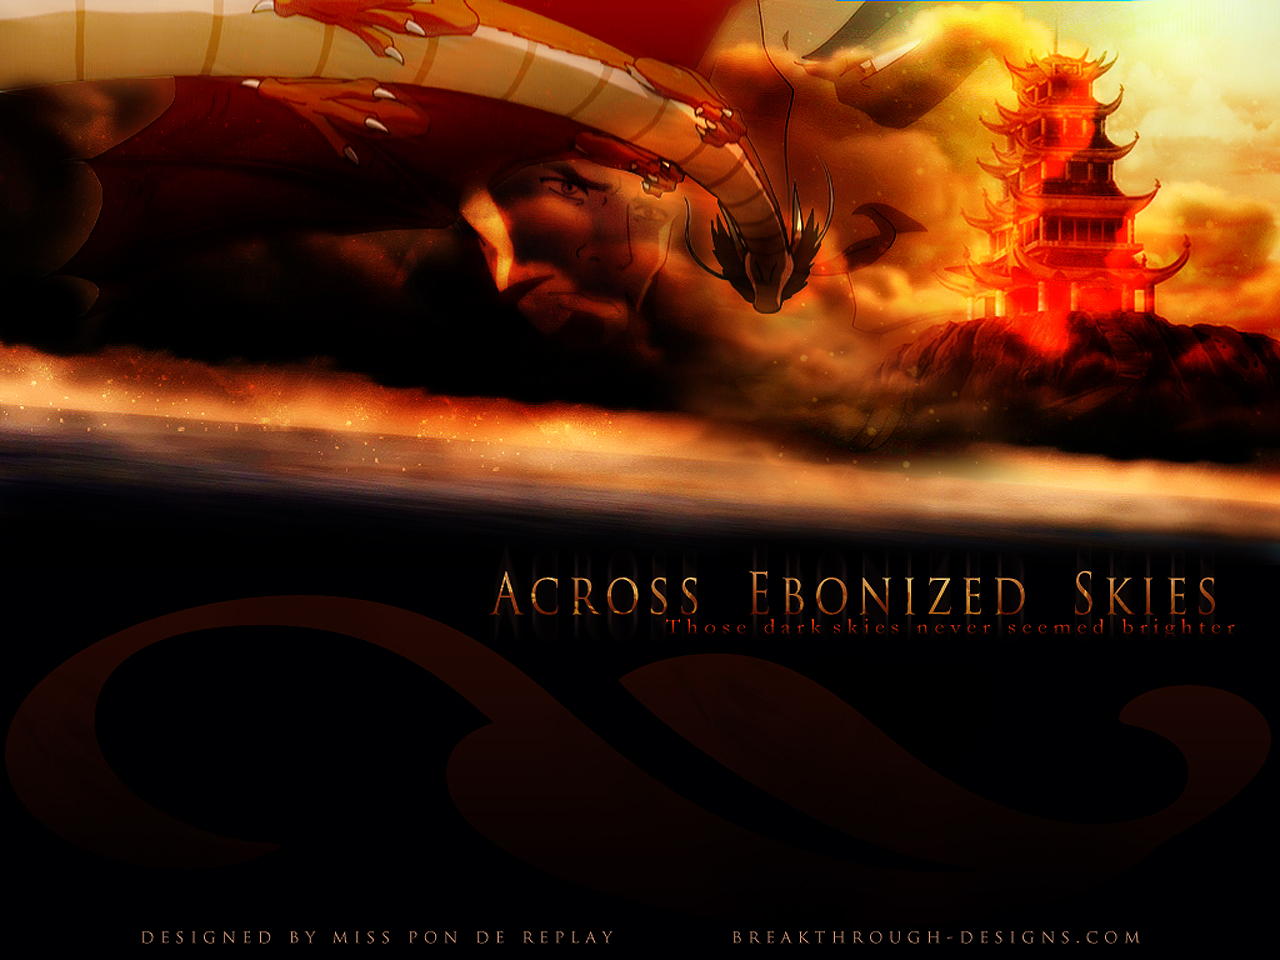  Designs Avatar The Last Airbender Wallpapers Subpage Short